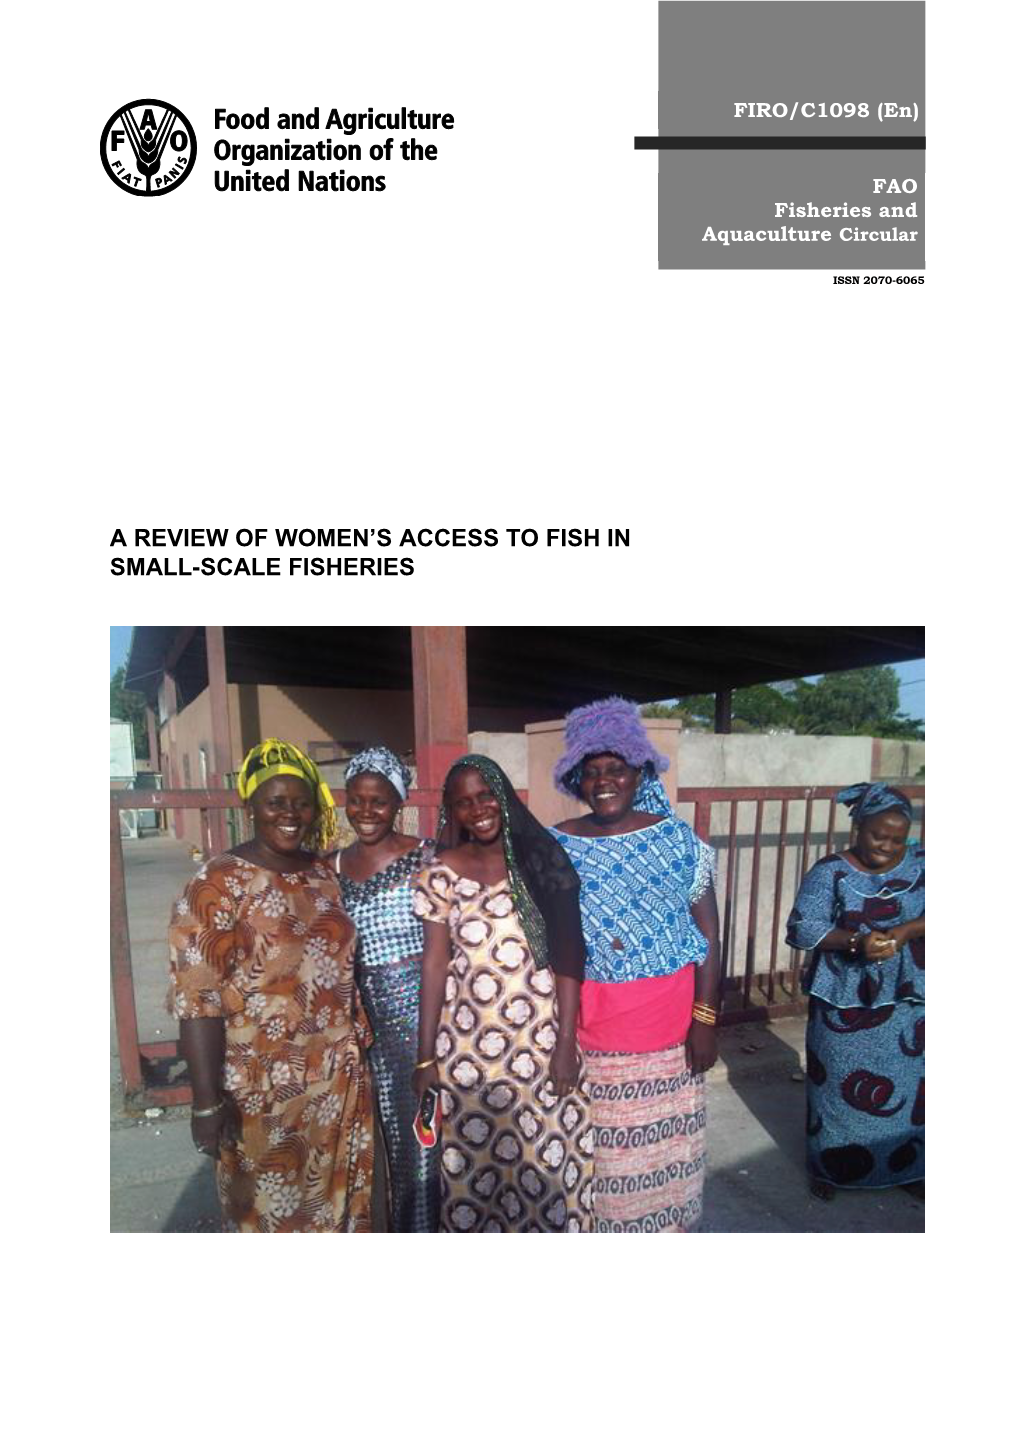 A Review of Women's Access to Fish in Small-Scale Fisheries